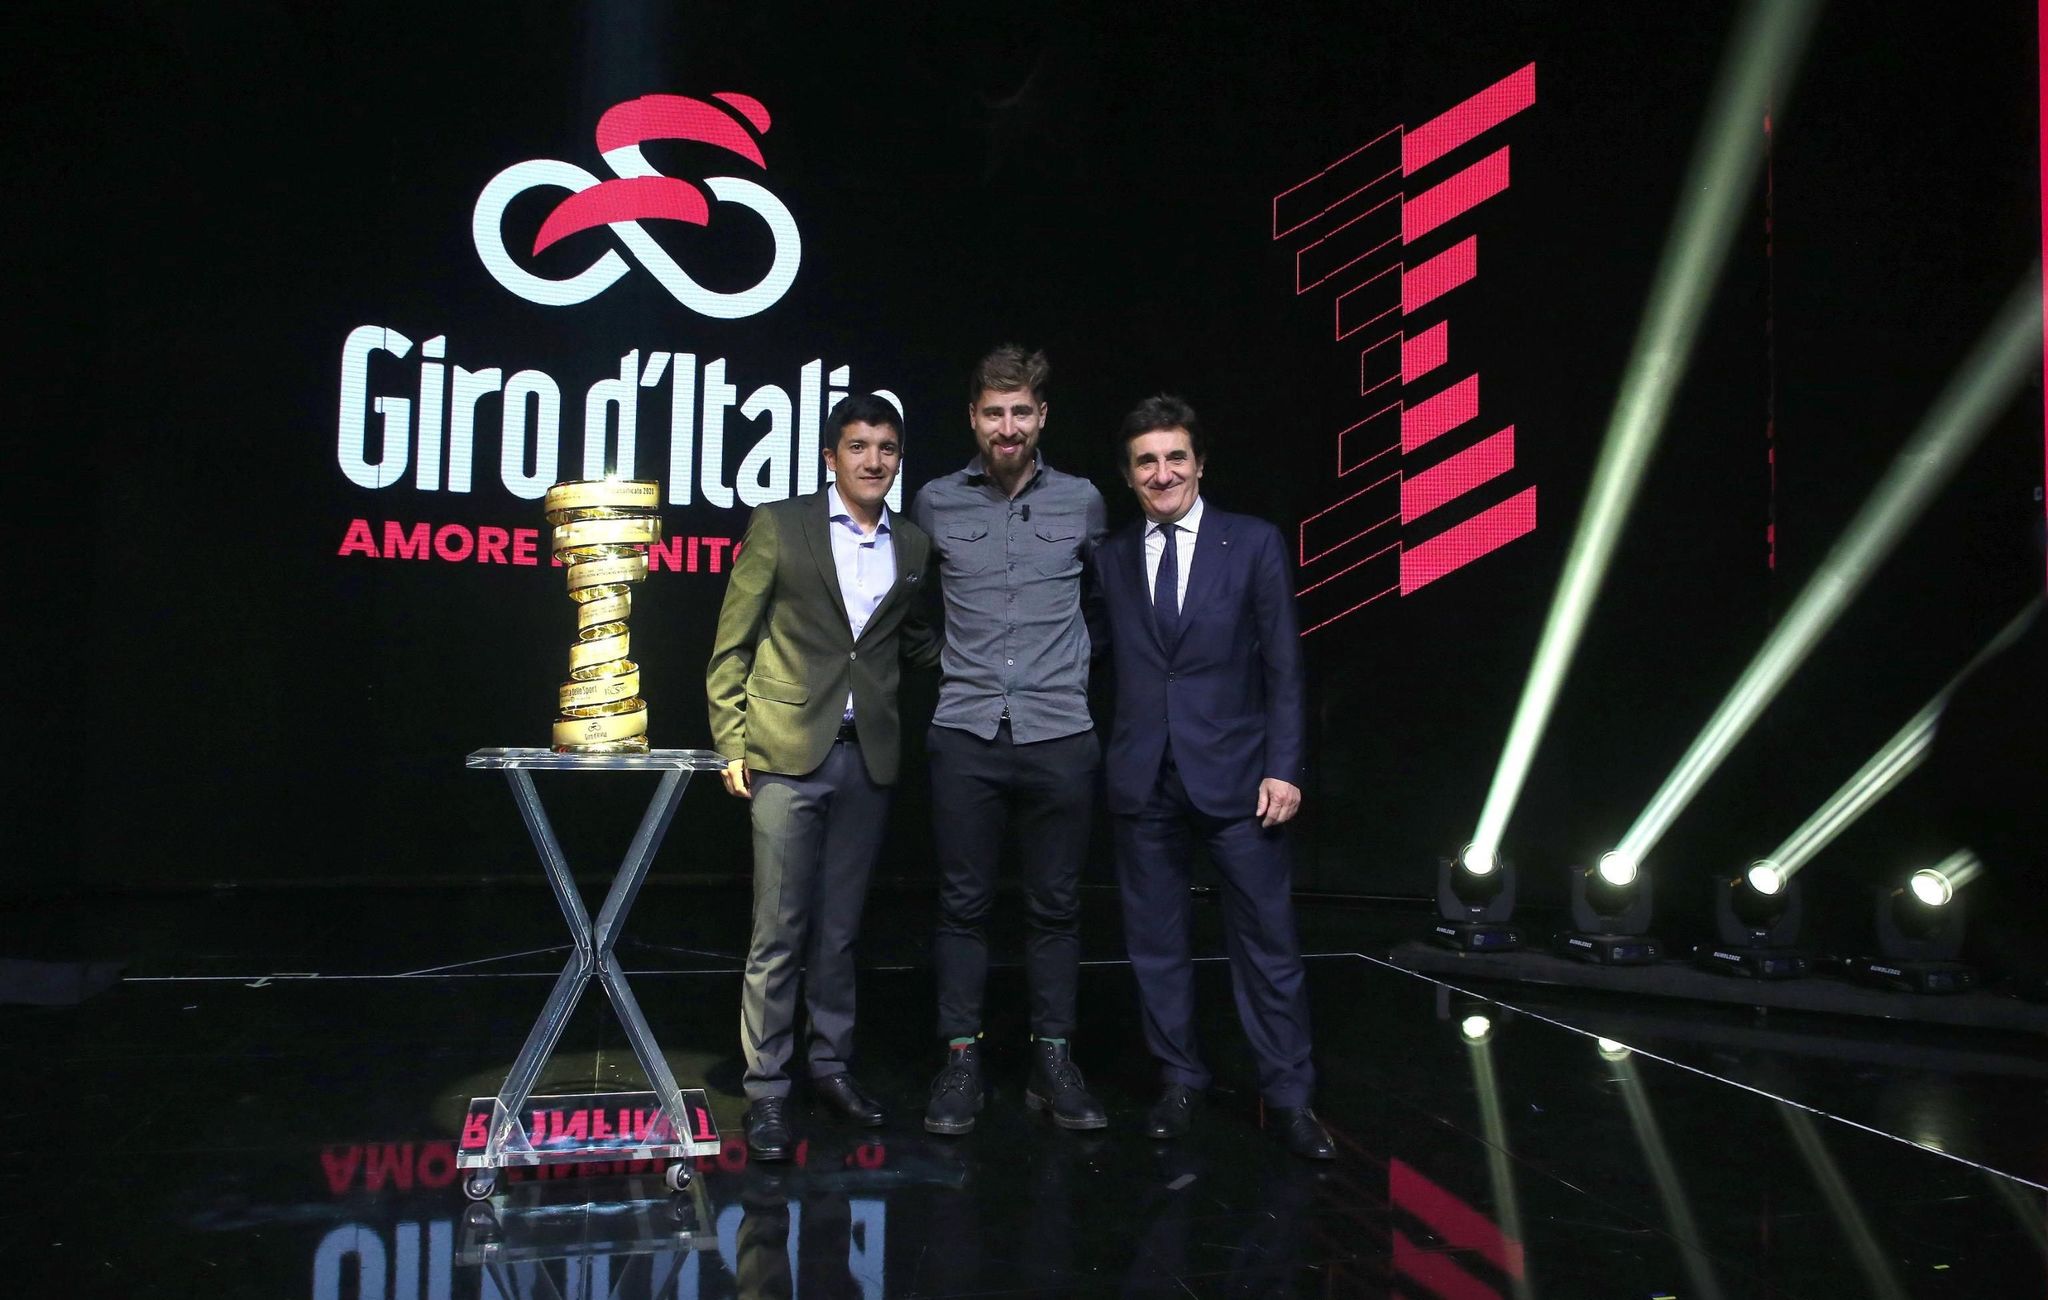 Milan (Italy), 24/10/2019.- (L-R) Ecuadorian rider Richard Carapaz, Slovak rider lt;HIT gt;Peter lt;/HIT gt; lt;HIT gt;Sagan lt;/HIT gt; and chairman of sport and media company RCS Urbano Cairo pose with the Giro dItalia trophy during the presentation of the 103rd edition of the Giro dItalia in Milan, Italy, 24 October 2019. The cycling tour will take place from 09 through 31 May 2020. (Ciclismo, Italia) EFE/EPA/MATTEO BAZZI